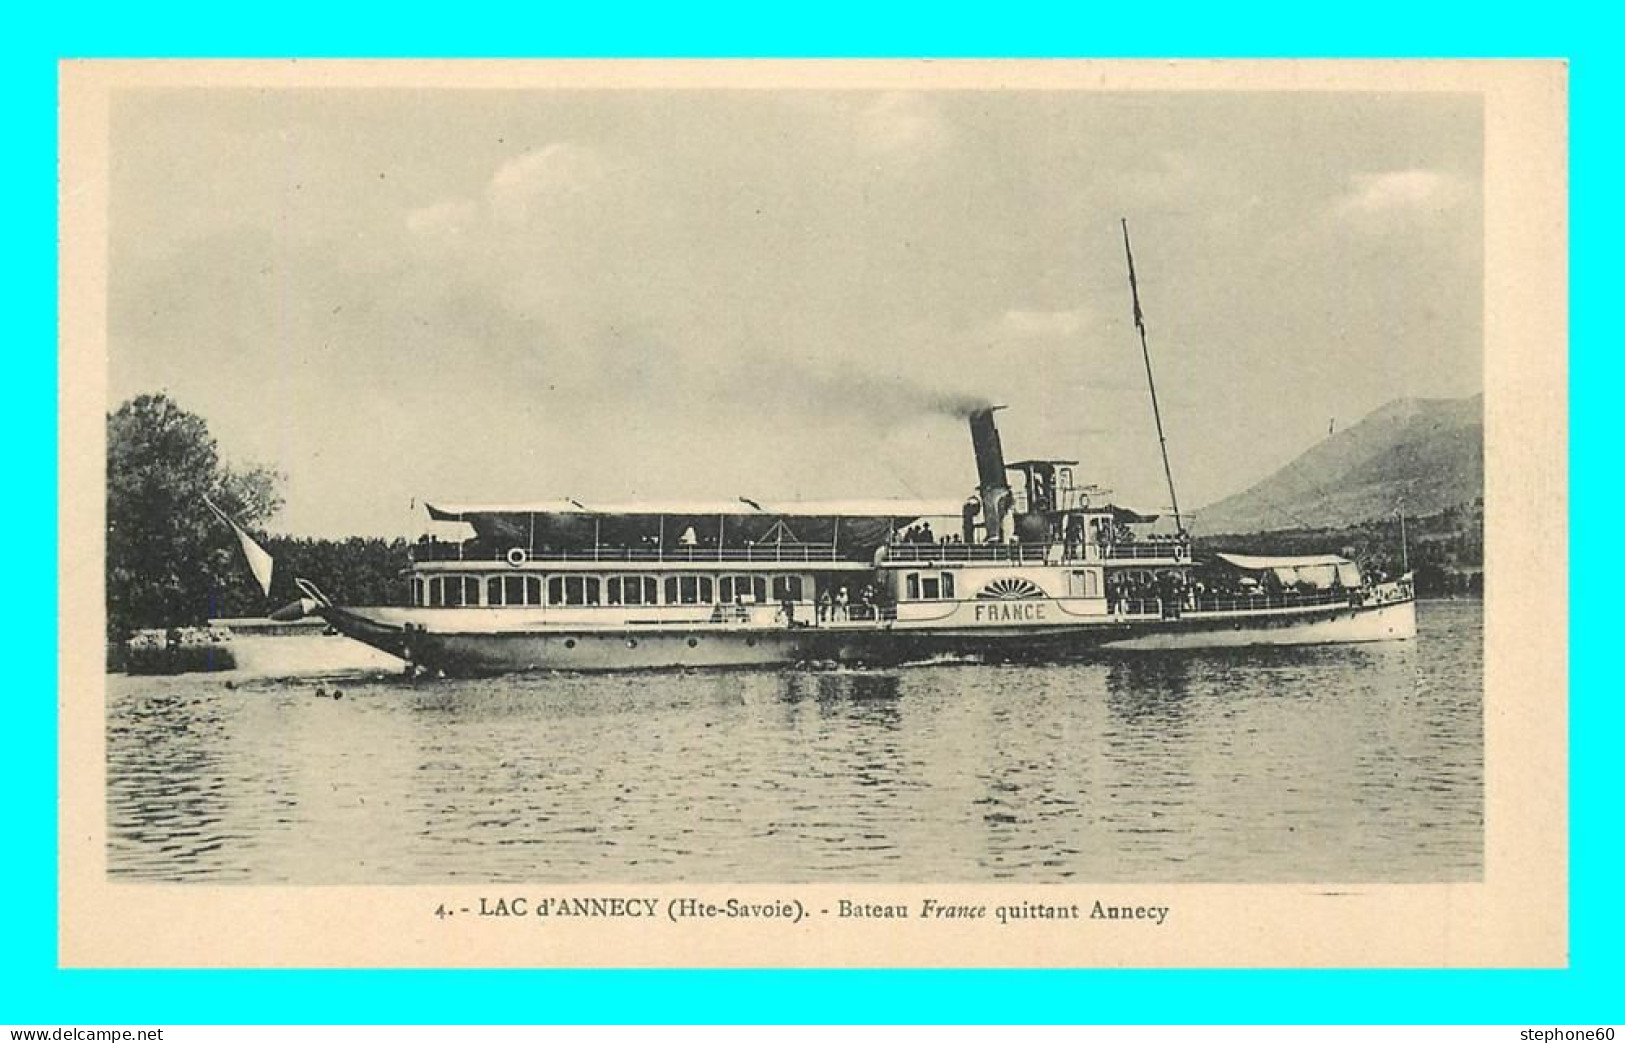 A840 / 173 74 - Lac D'Annecy Bateau France Quittant Annecy - Annecy